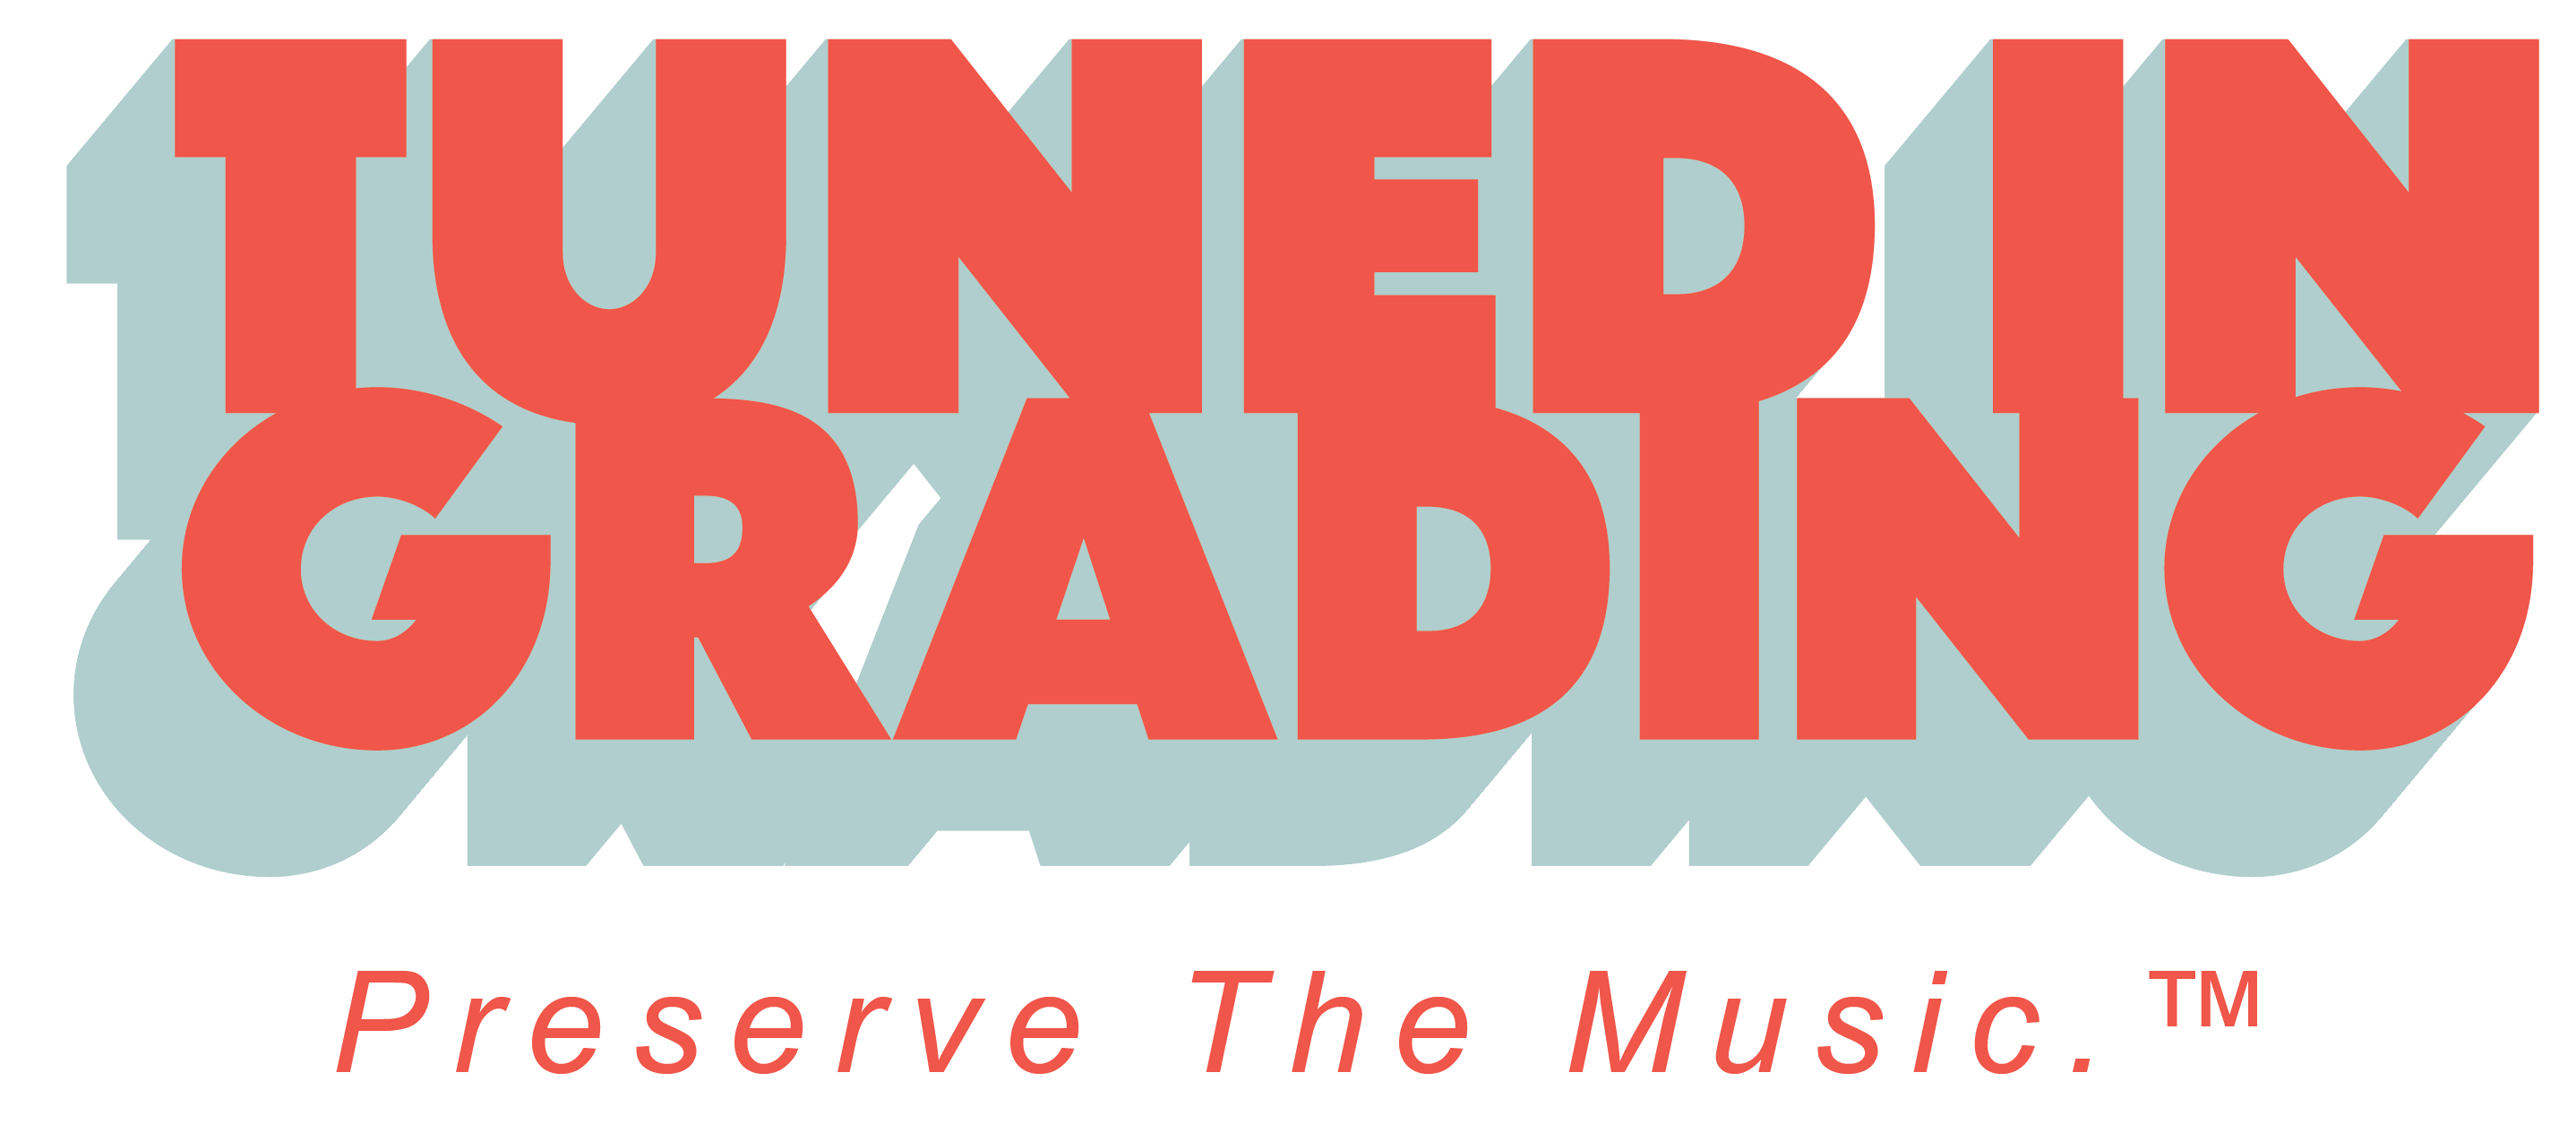 The official logo and slogan of Tuned In Grading.